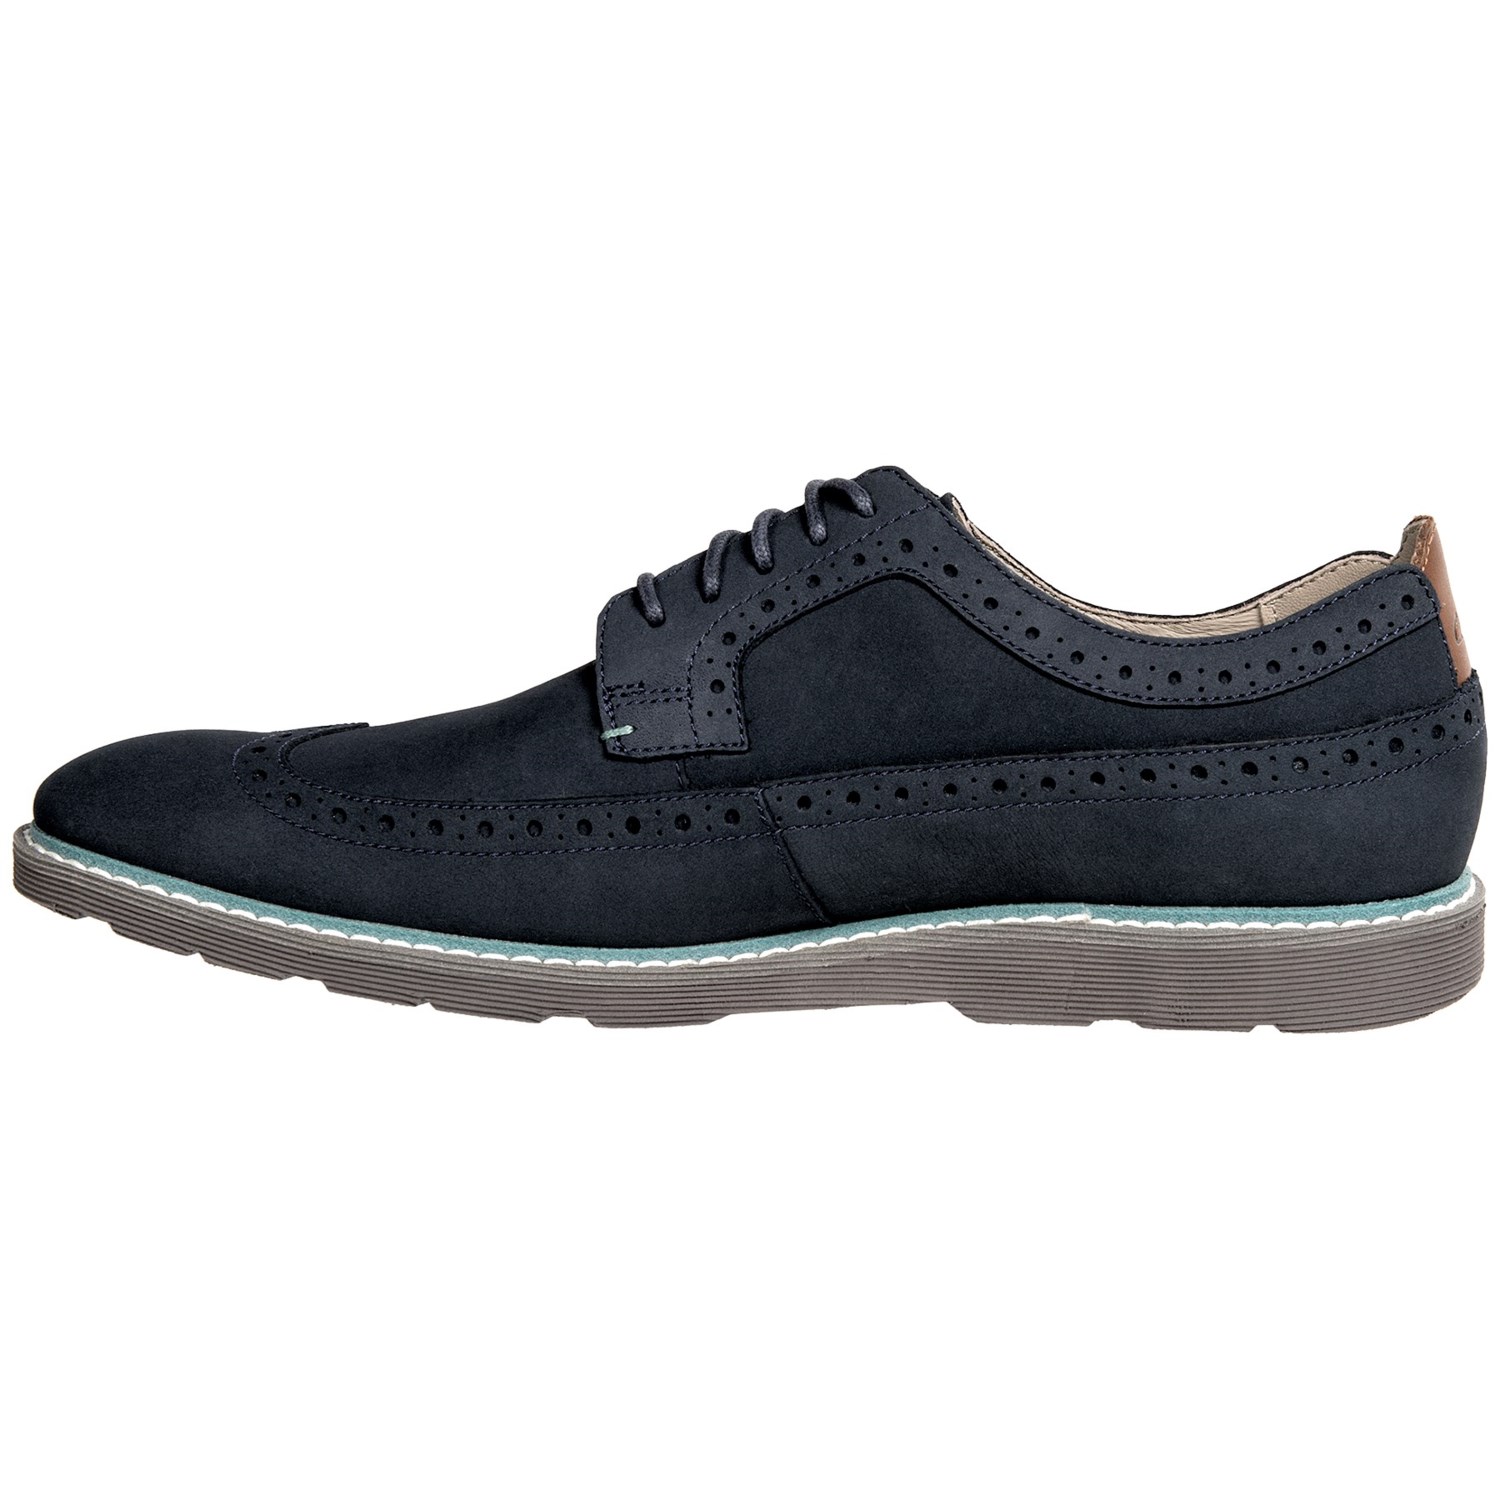 Clarks Gambeson Dress Wingtip Shoes (For Men) - Save 46%